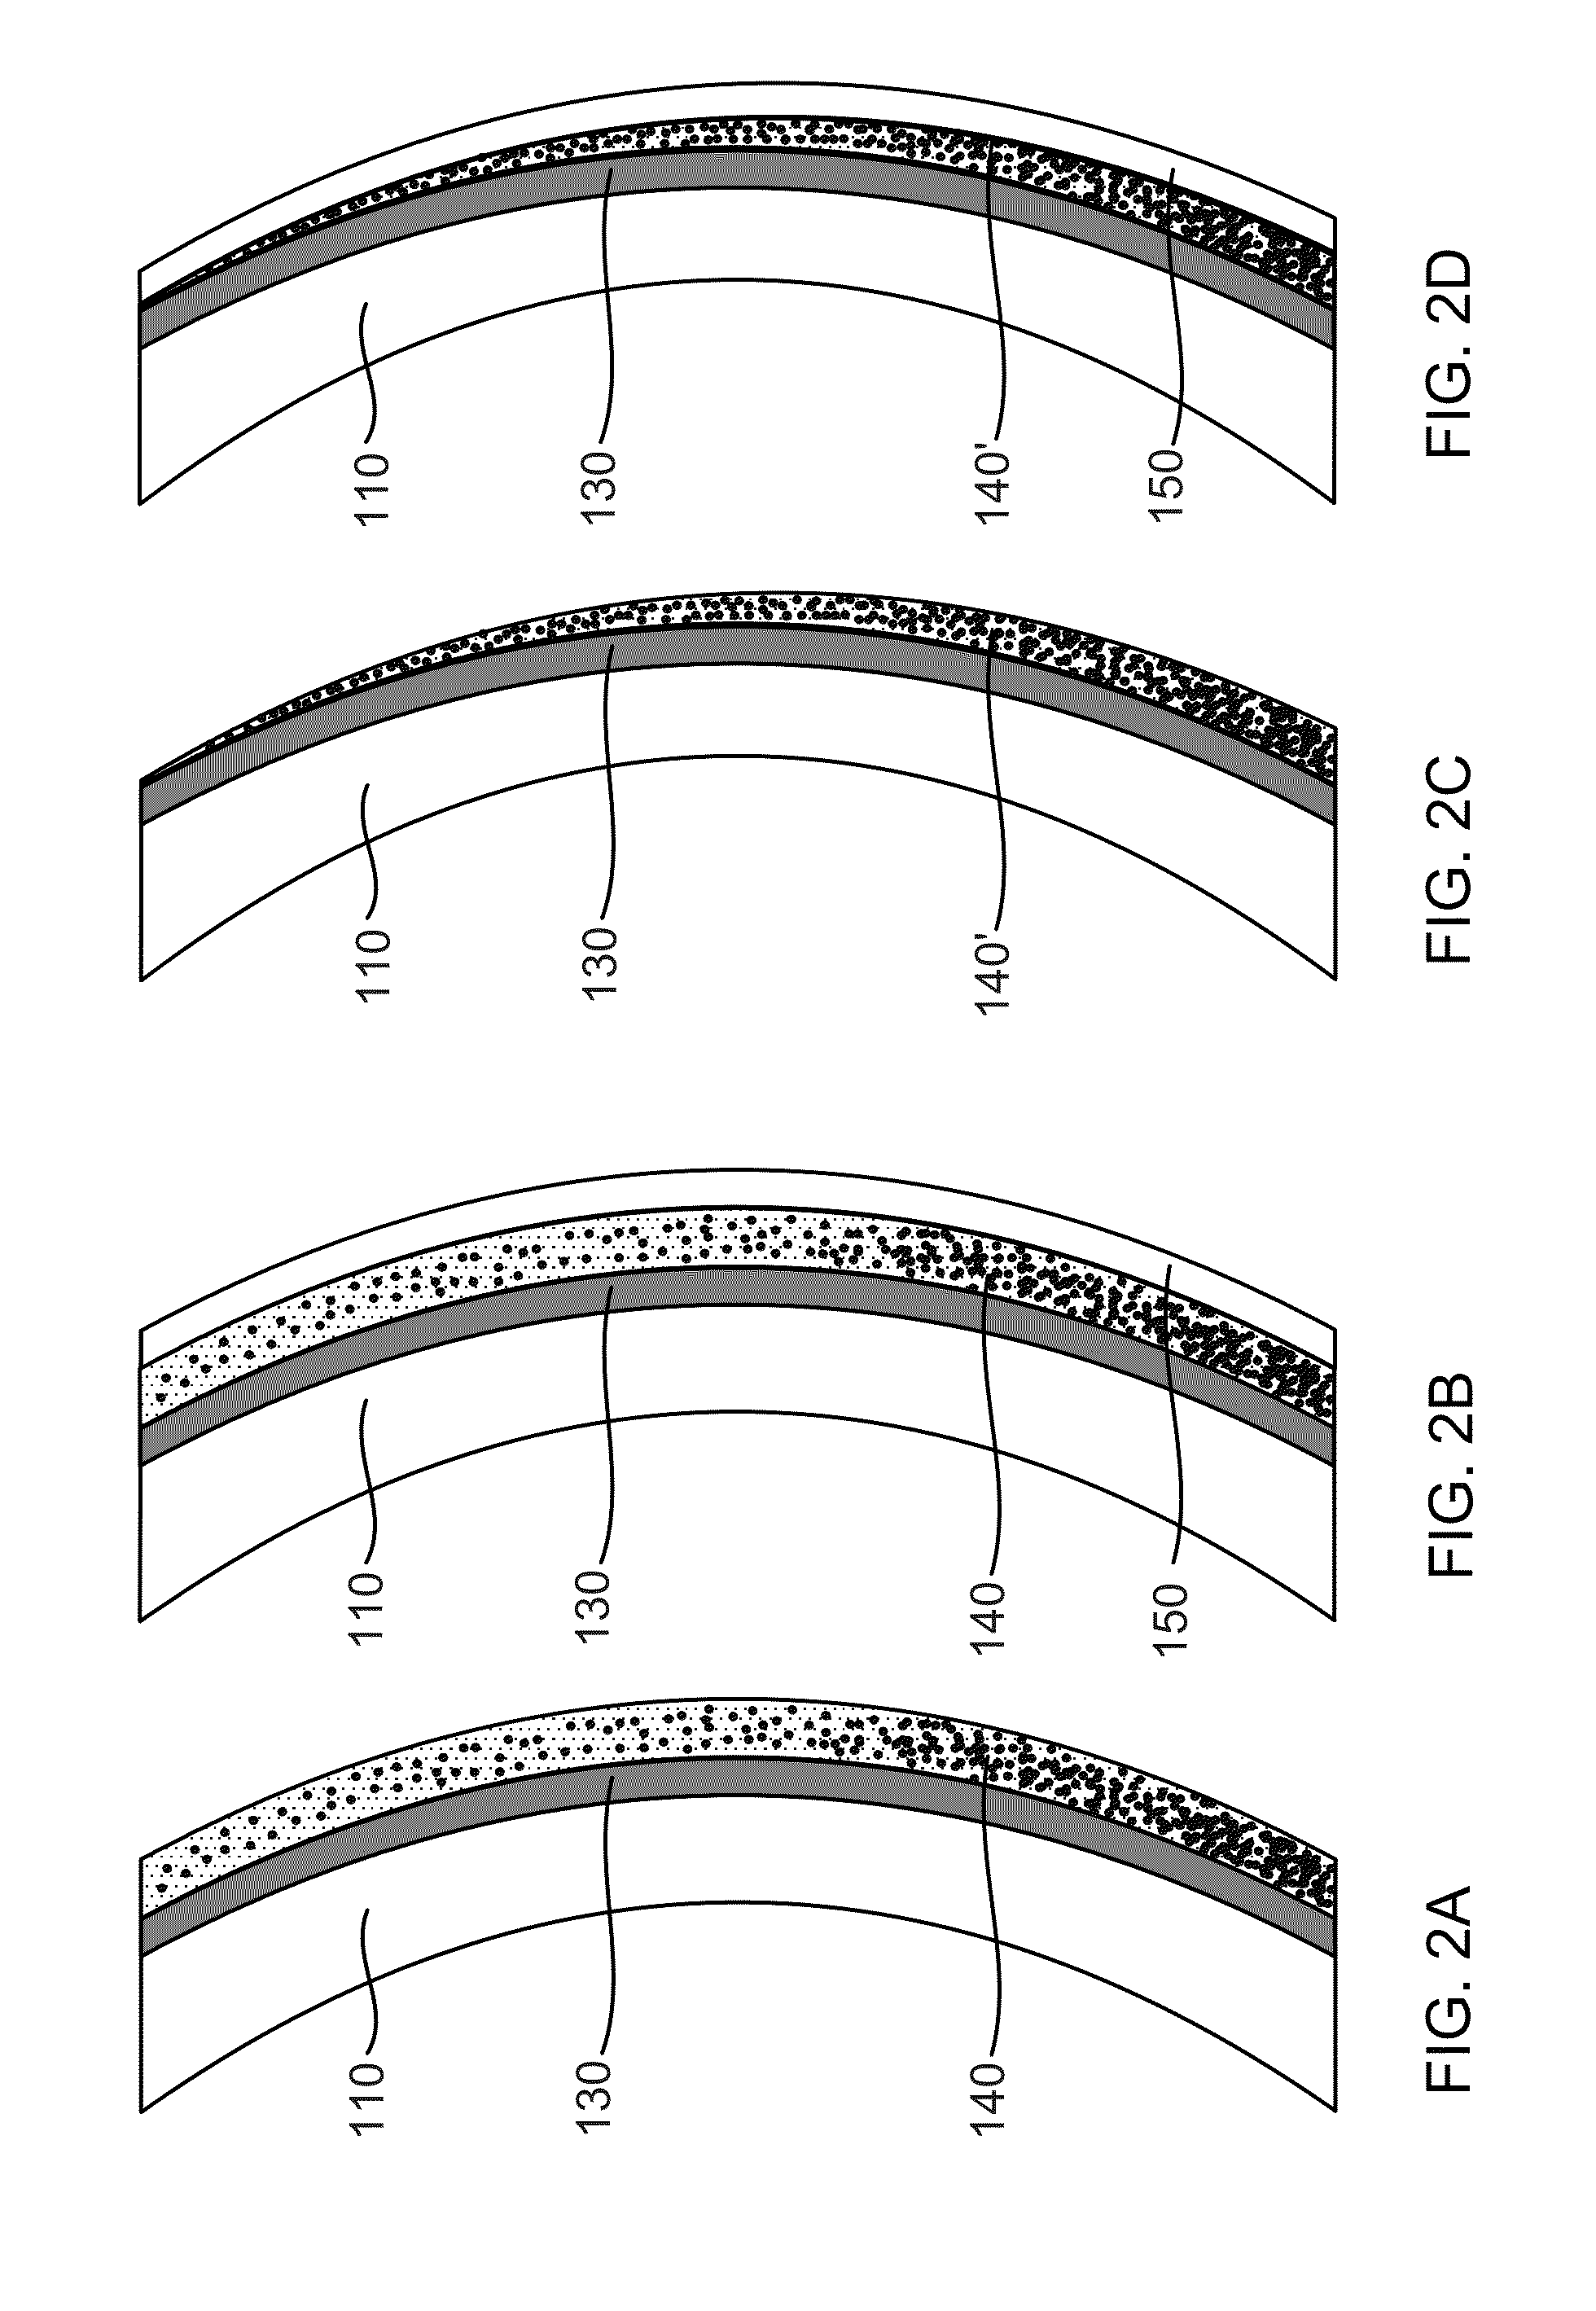 Lenses with graded photochromic, molds and methods of making same